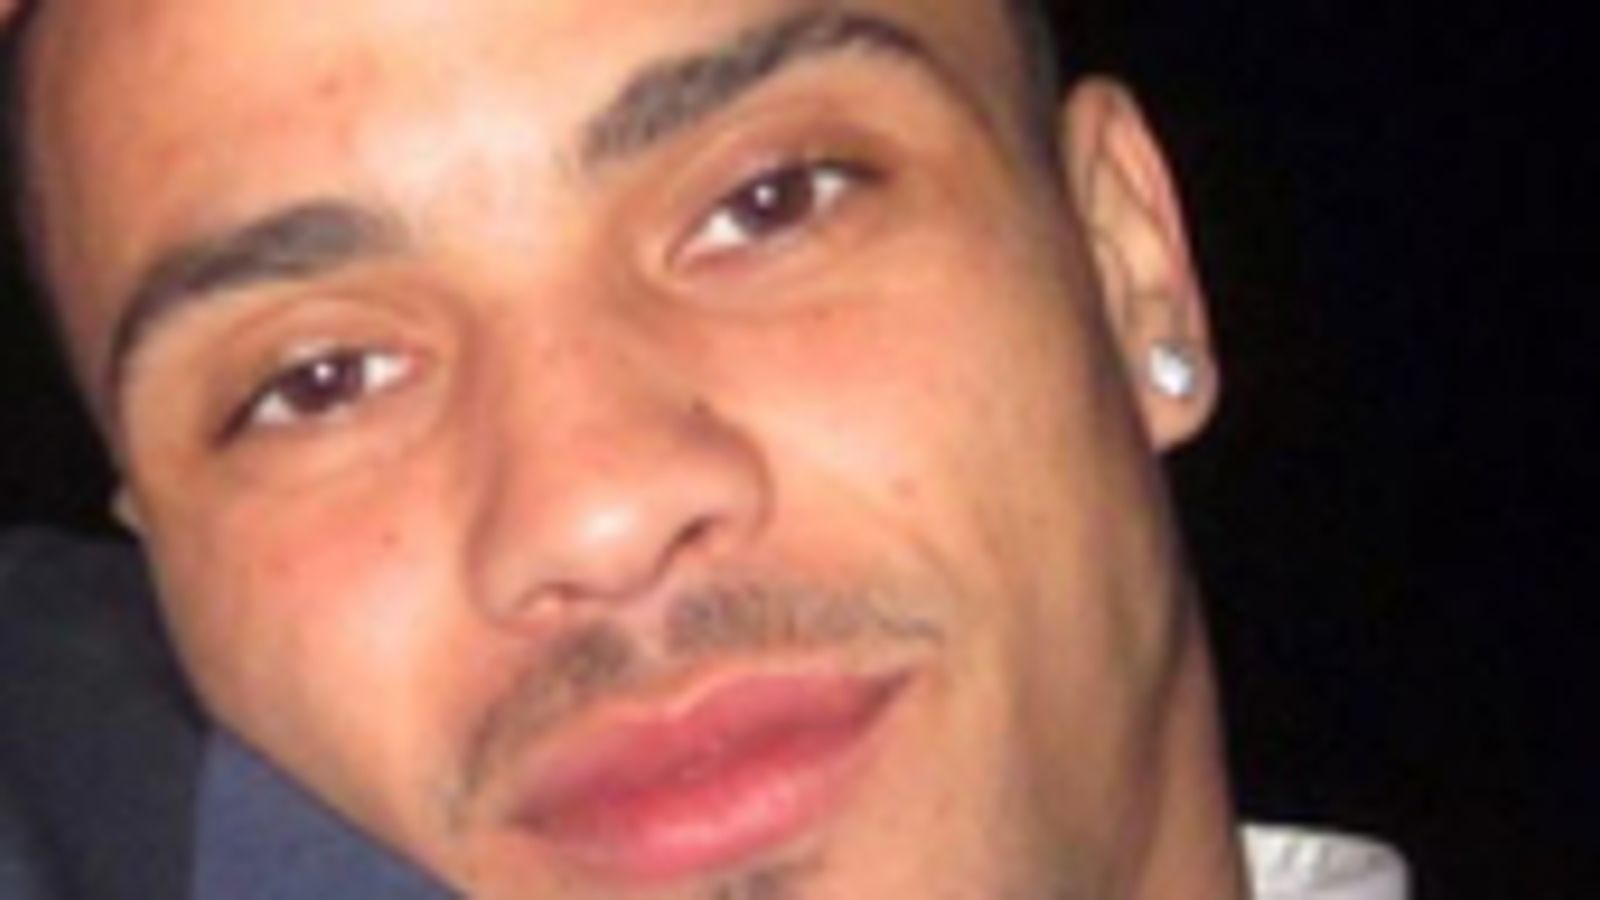 Jermaine Baker shooting: Met Police firearms officer to face gross misconduct hearing